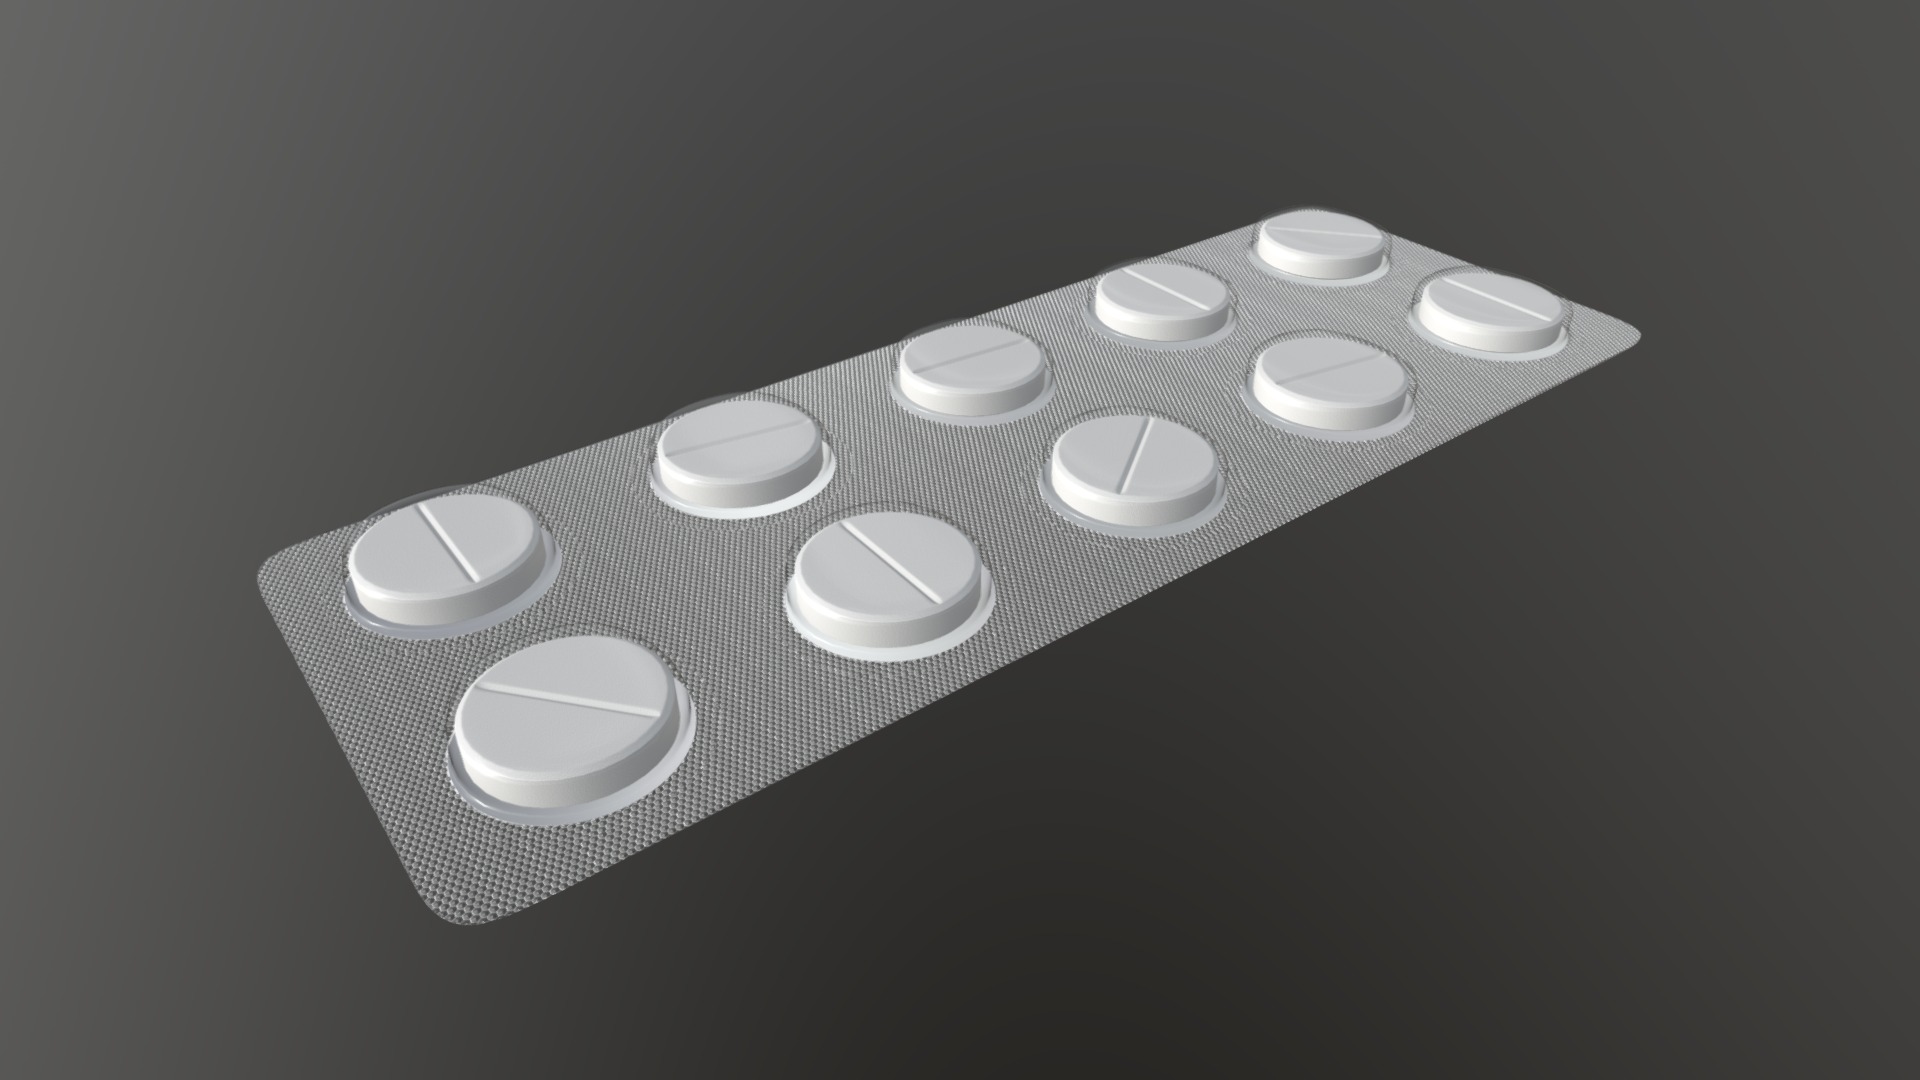 3D model pills in blister - This is a 3D model of the pills in blister. The 3D model is about a group of white plates.